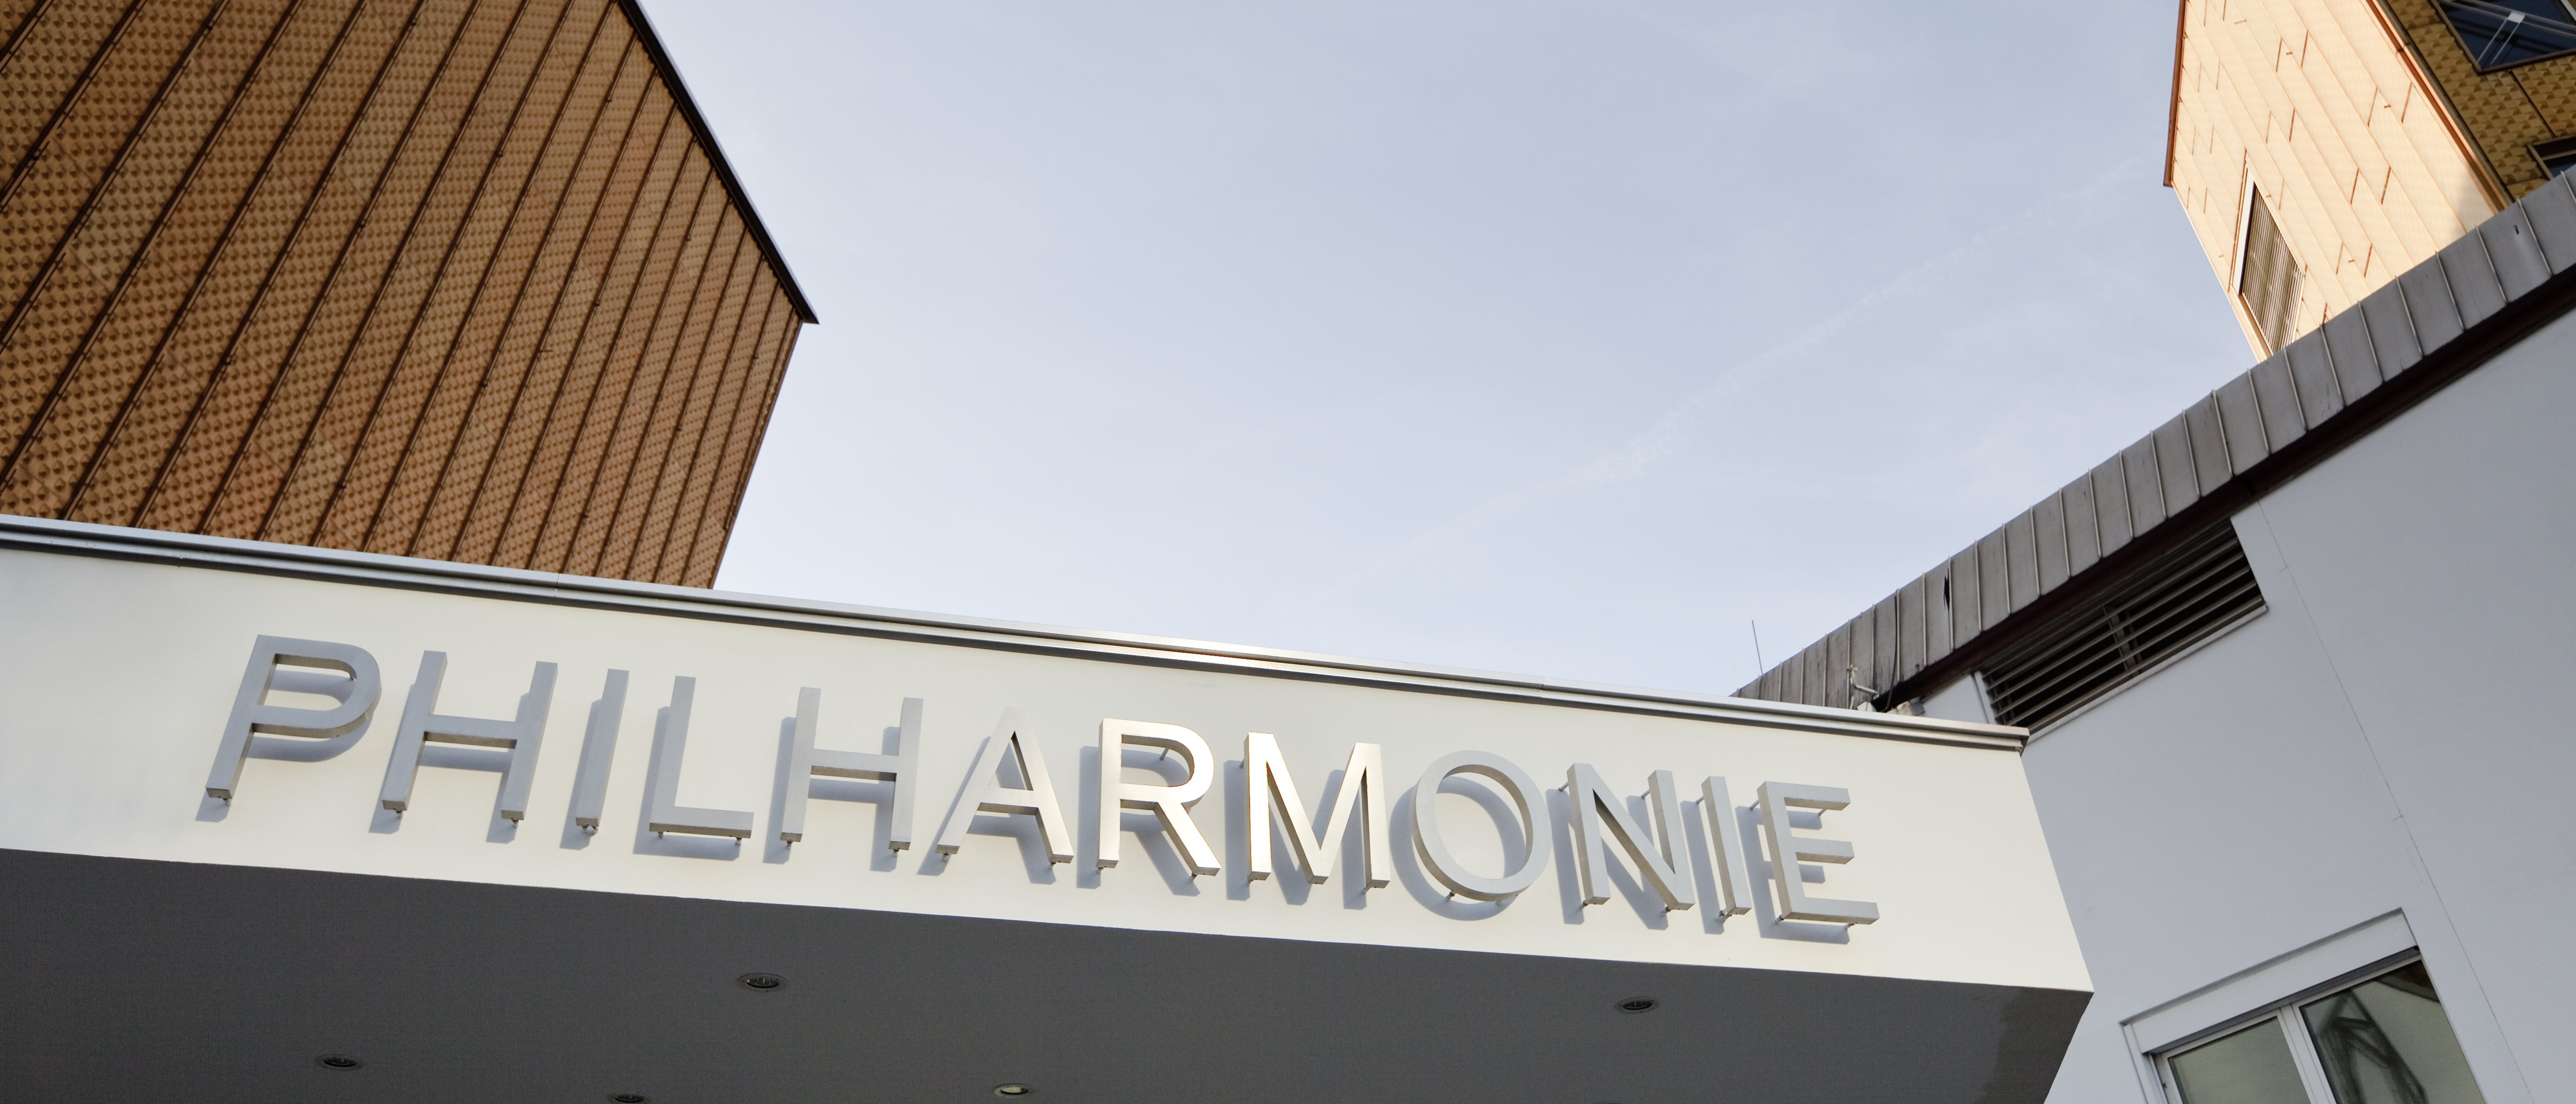 Entrance gate with Philharmonie lettering